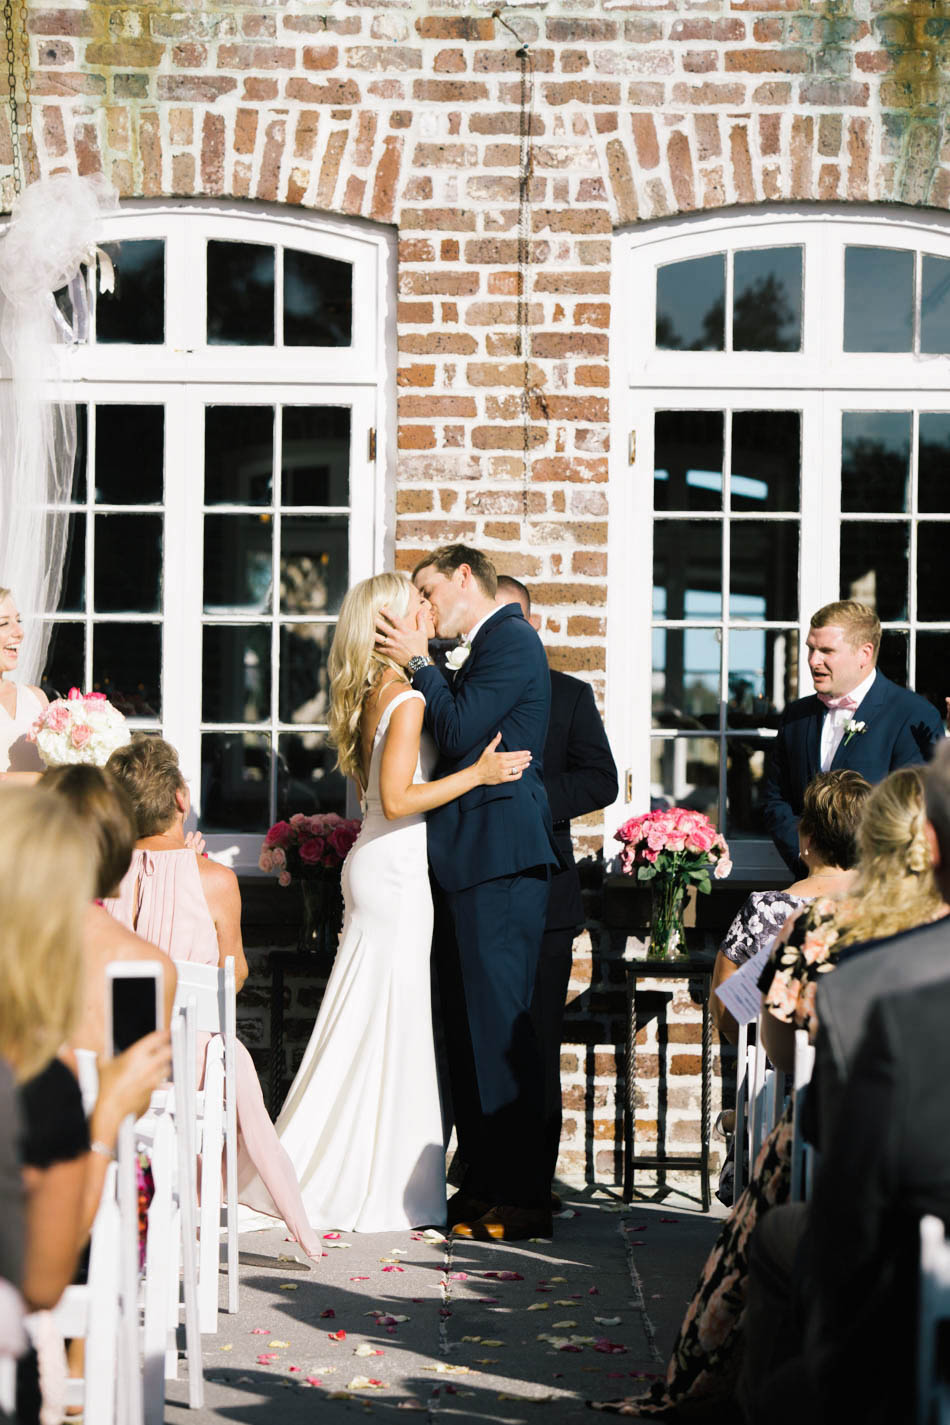 Bride and groom kiss, Rice Mill Building, Charleston, South Carolina Kate Timbers Photography. http://katetimbers.com #katetimbersphotography // Charleston Photography // Inspiration